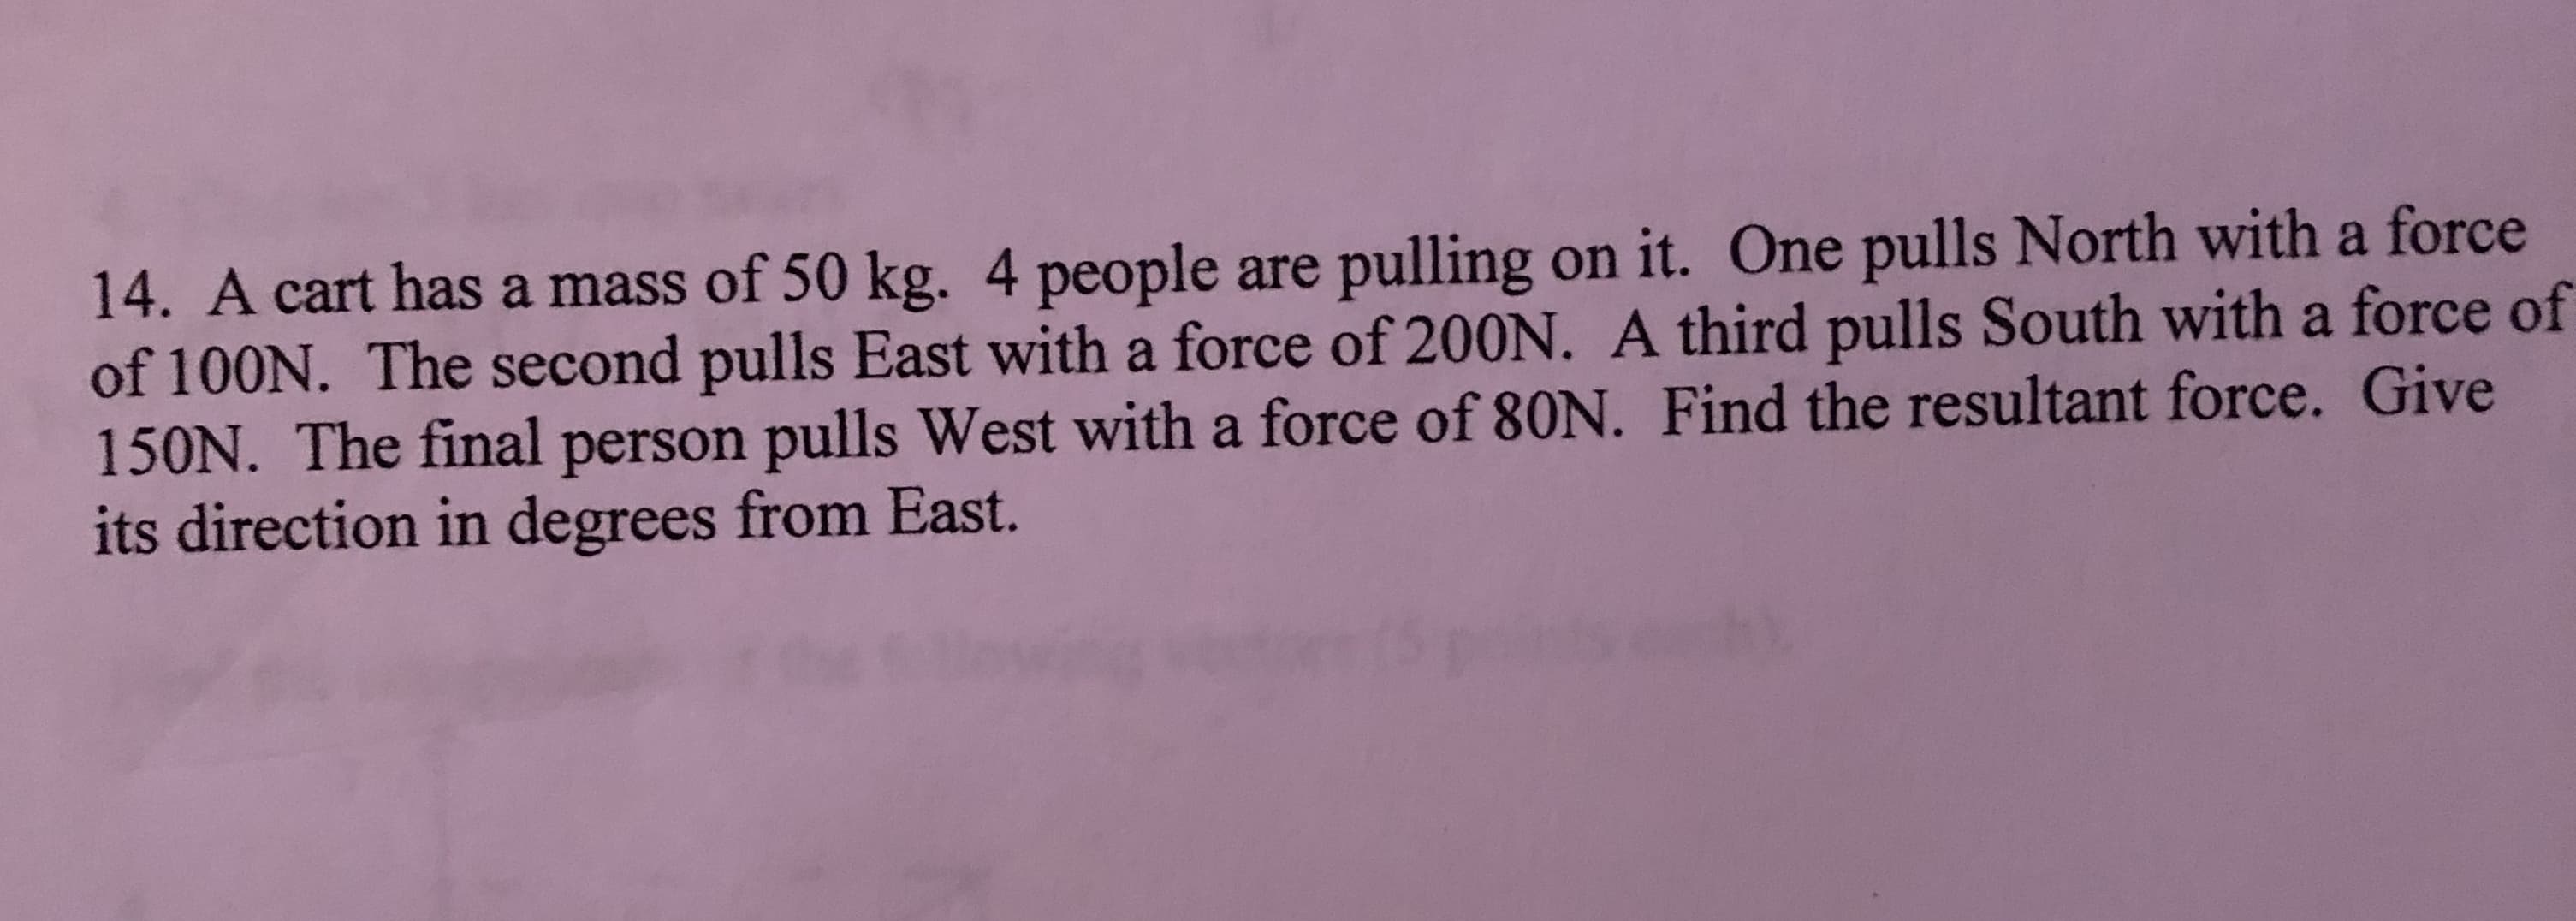 14. A cart has a mass of 50 kg. 4 people are pulling on it. One pulls North with a force
of 100N. The second pulls East with a force of 200N. A third pulls South with a force of
150N. The final person pulls West with a force of 80N. Find the resultant force. Give
its direction in degrees from East.
